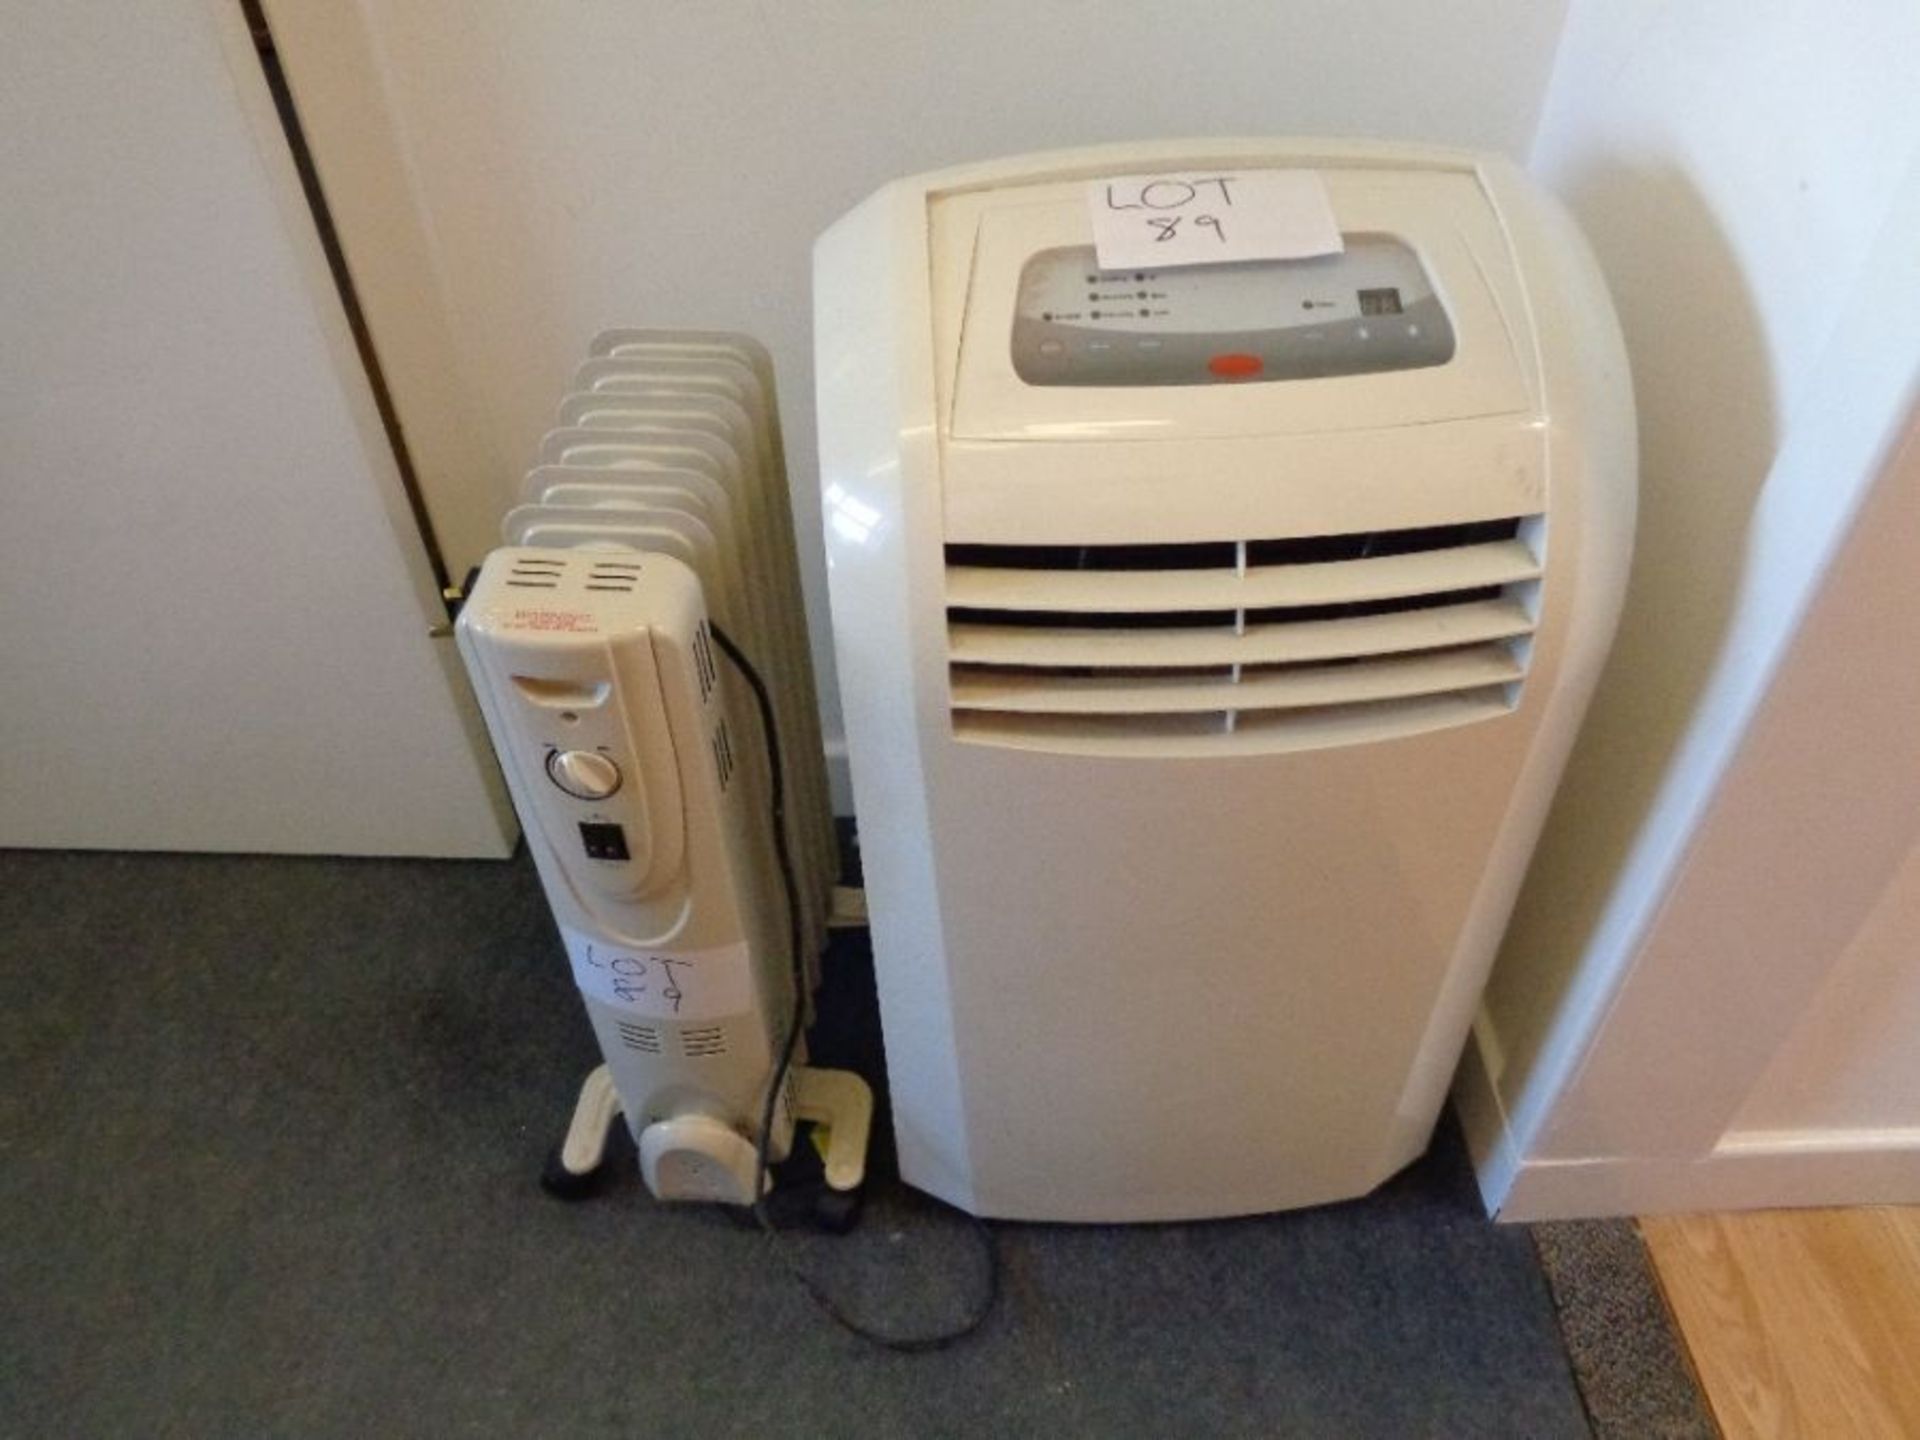 Oil filled electric radiator and NB dehumidifier as lotted